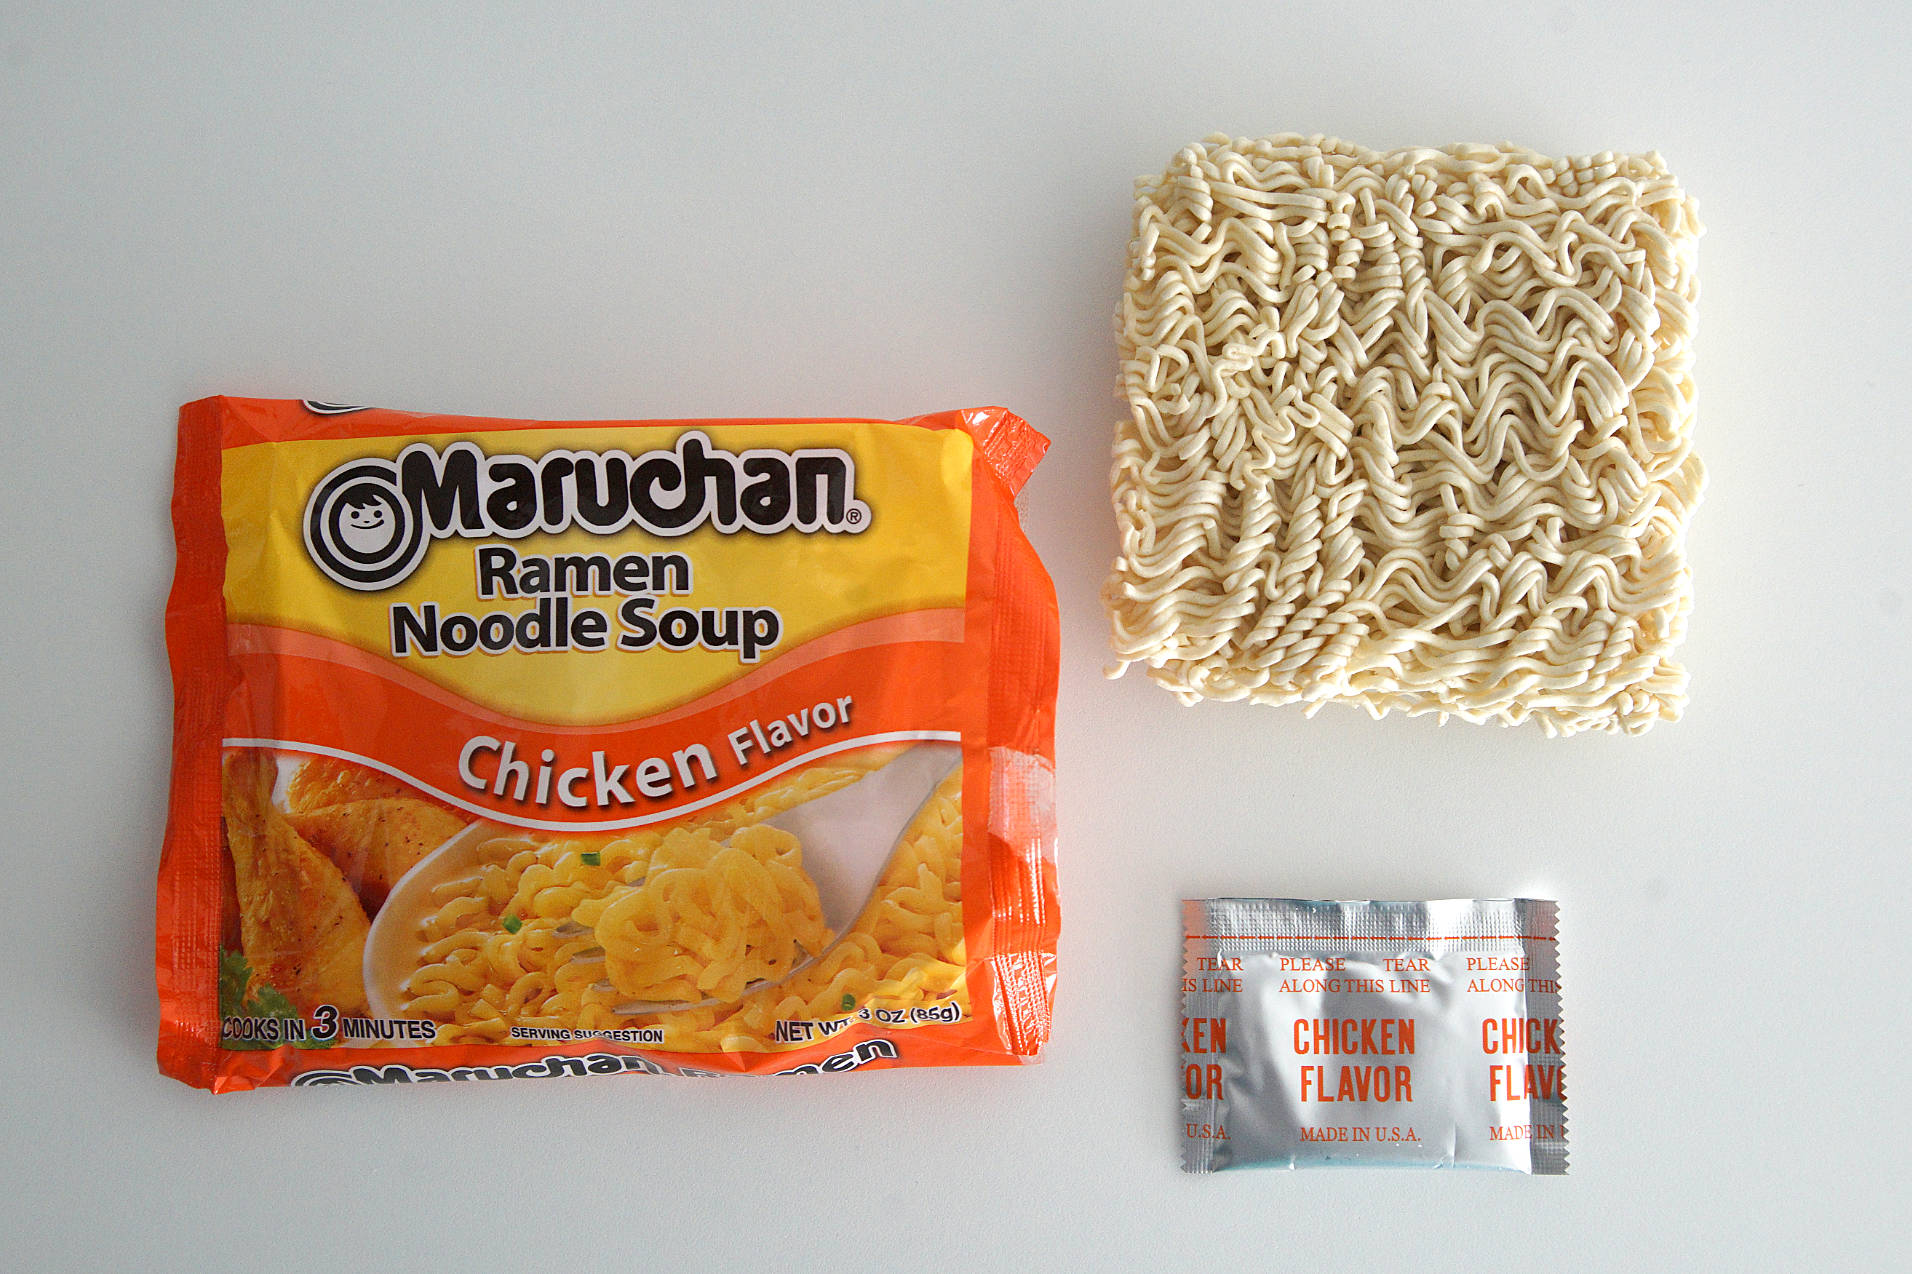 Maruchan chicken flavored noodles with seasoning packet